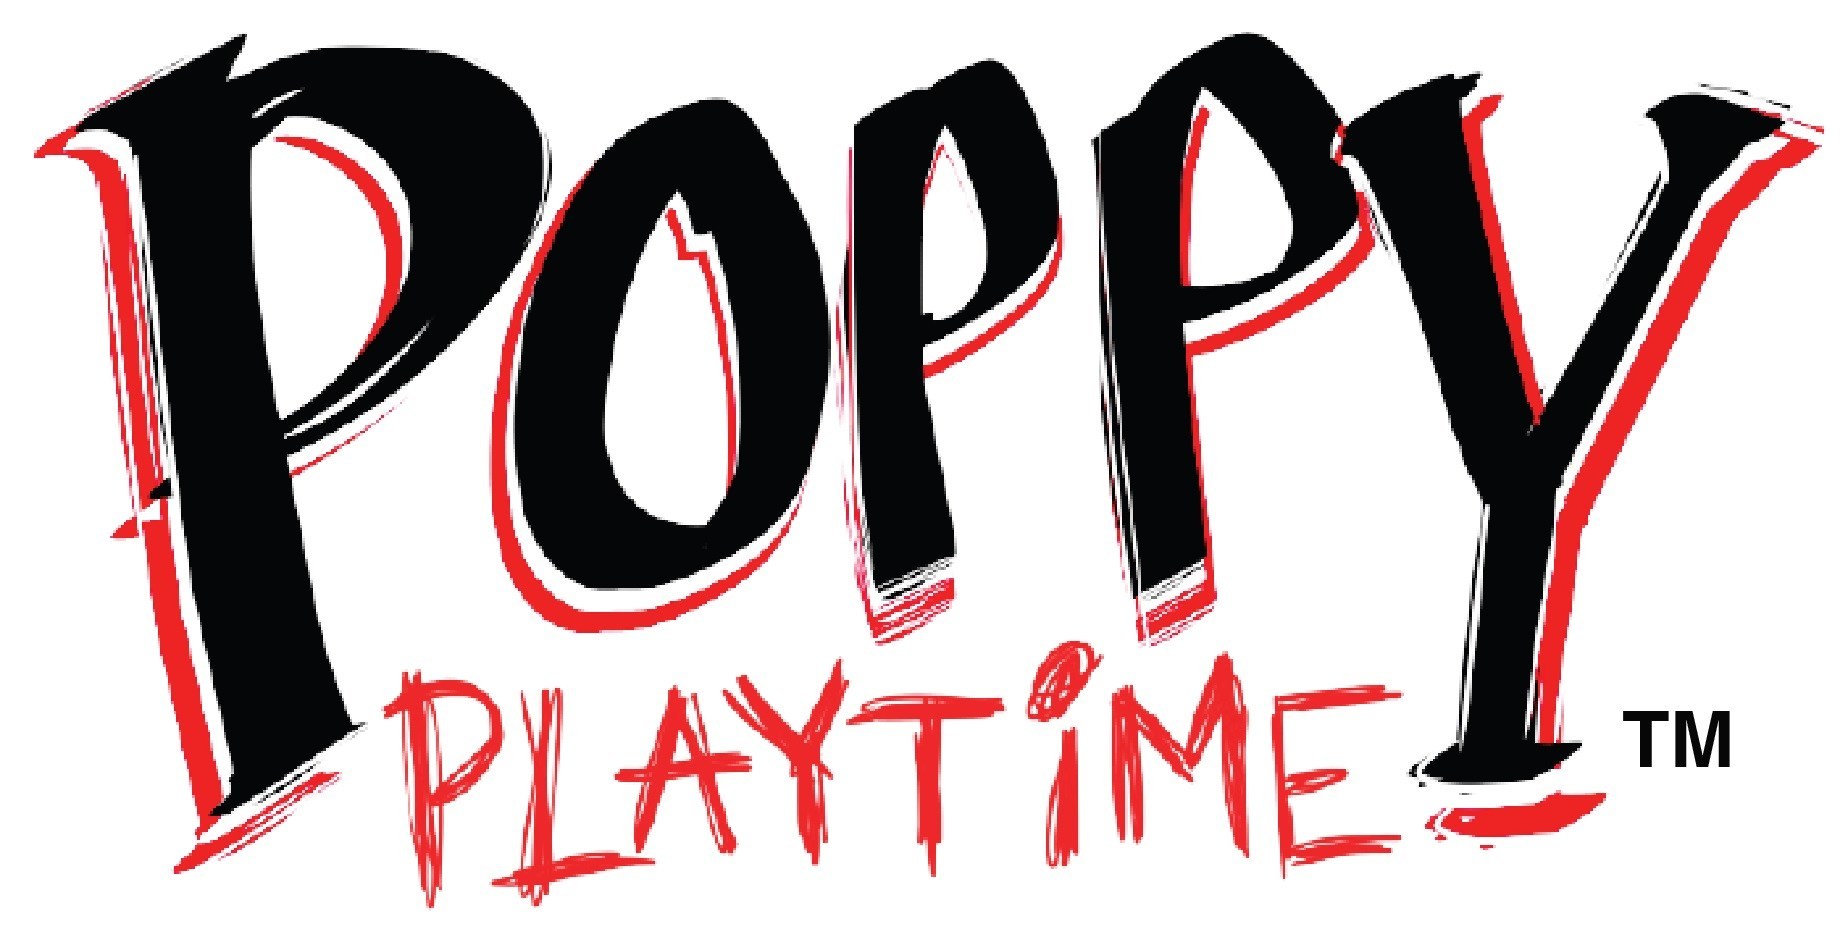 Poppy Playtime Mobile Is Now Available On iOS and Android